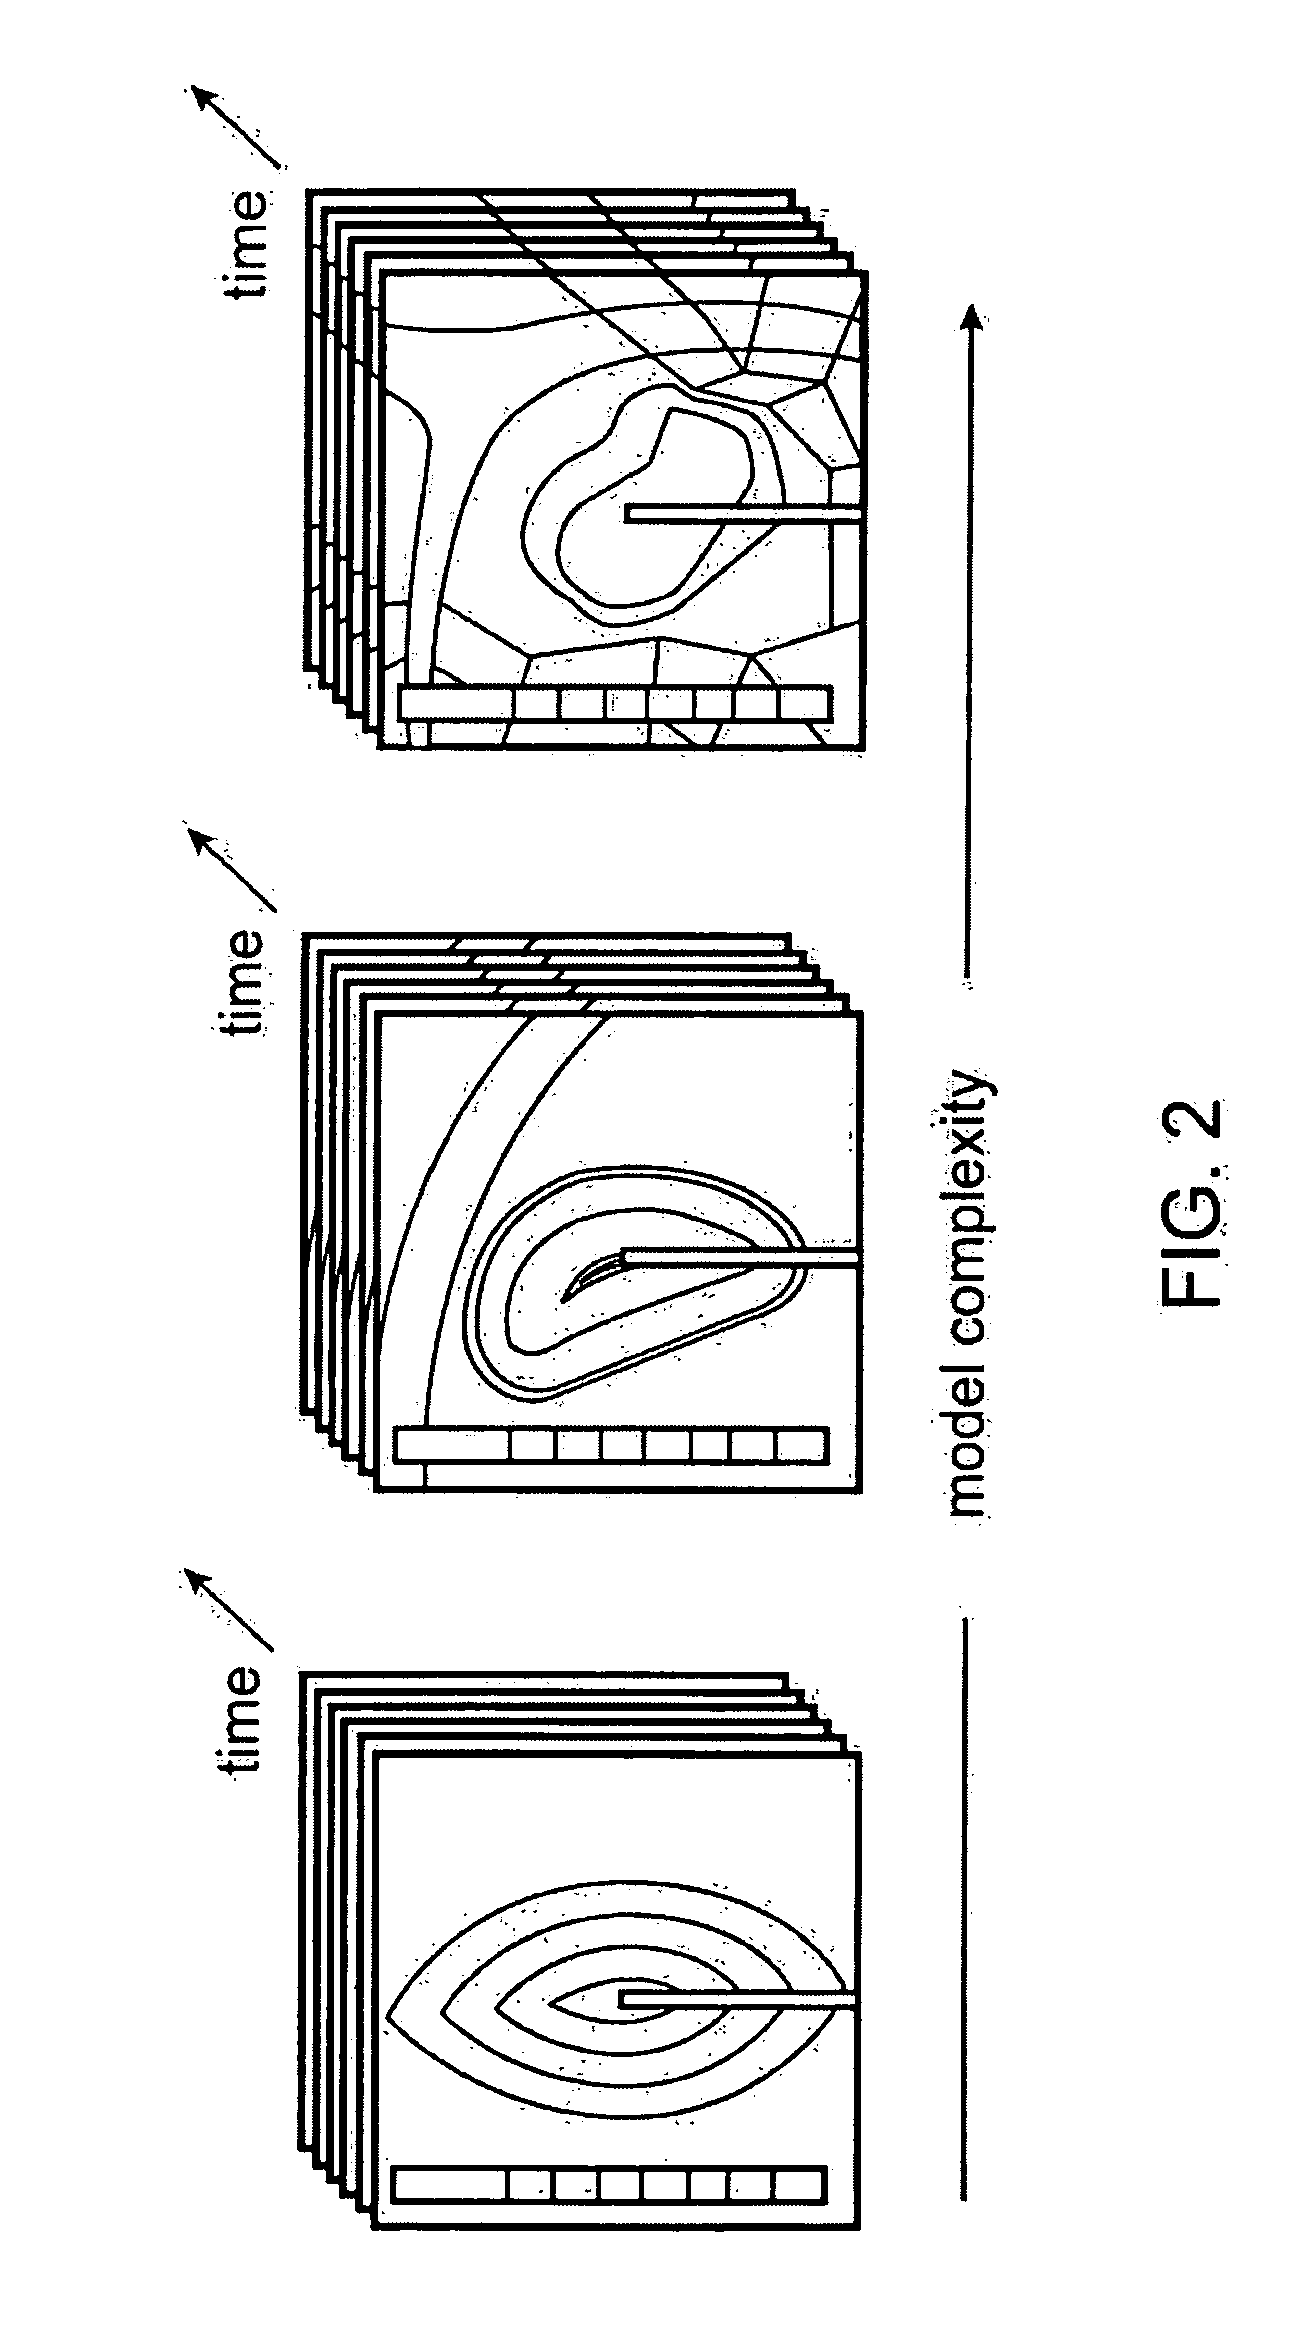 Thermal Ablation Design and Planning Methods